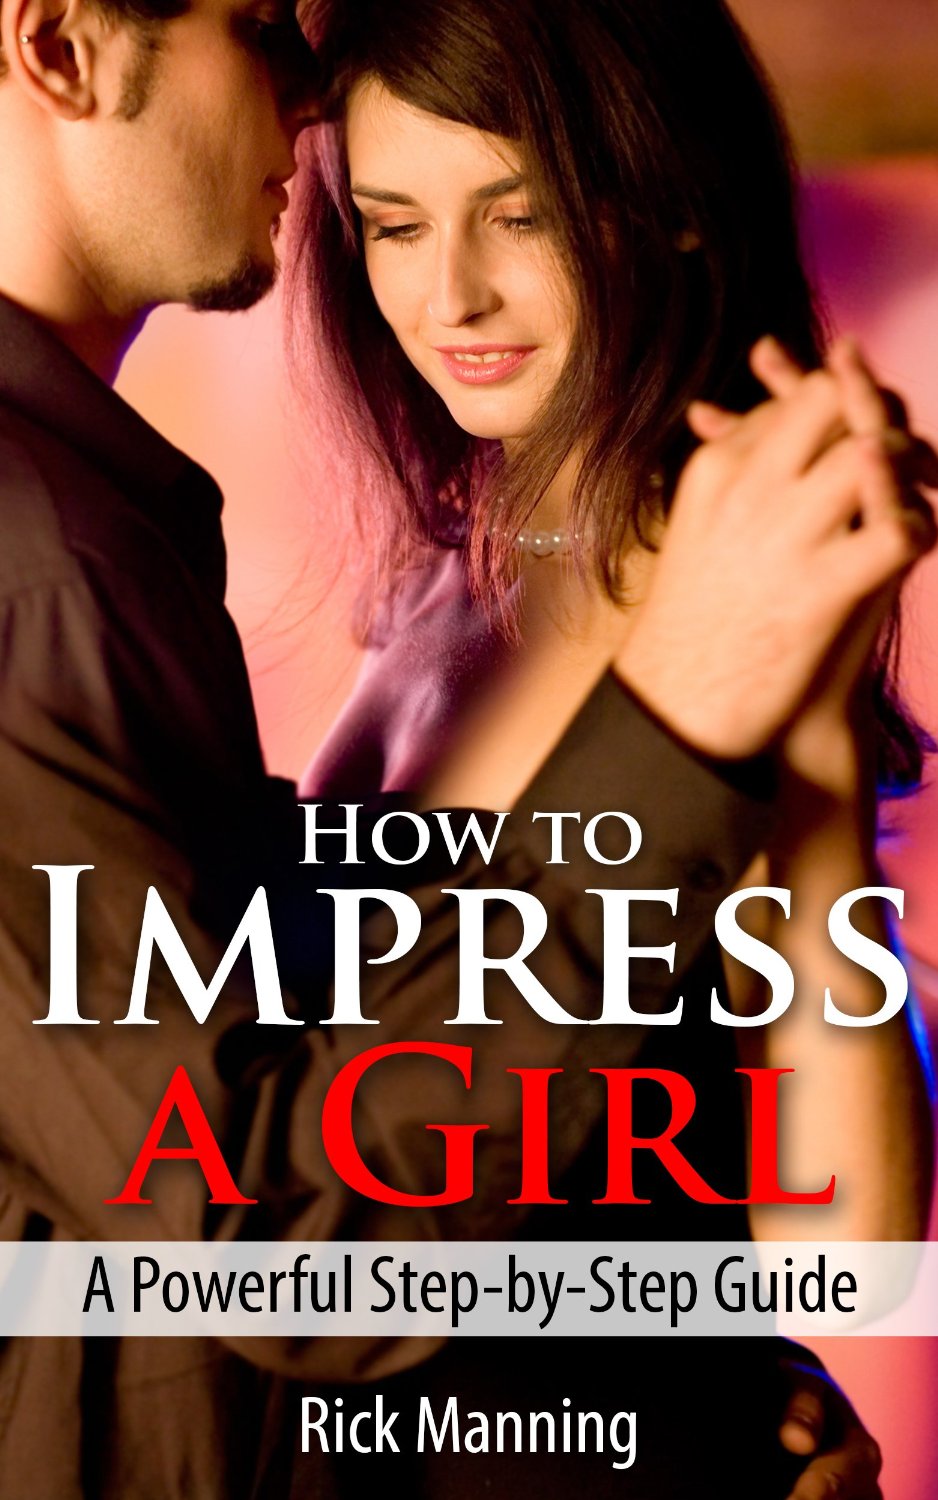 How To Impress A Girl by Rick Manning